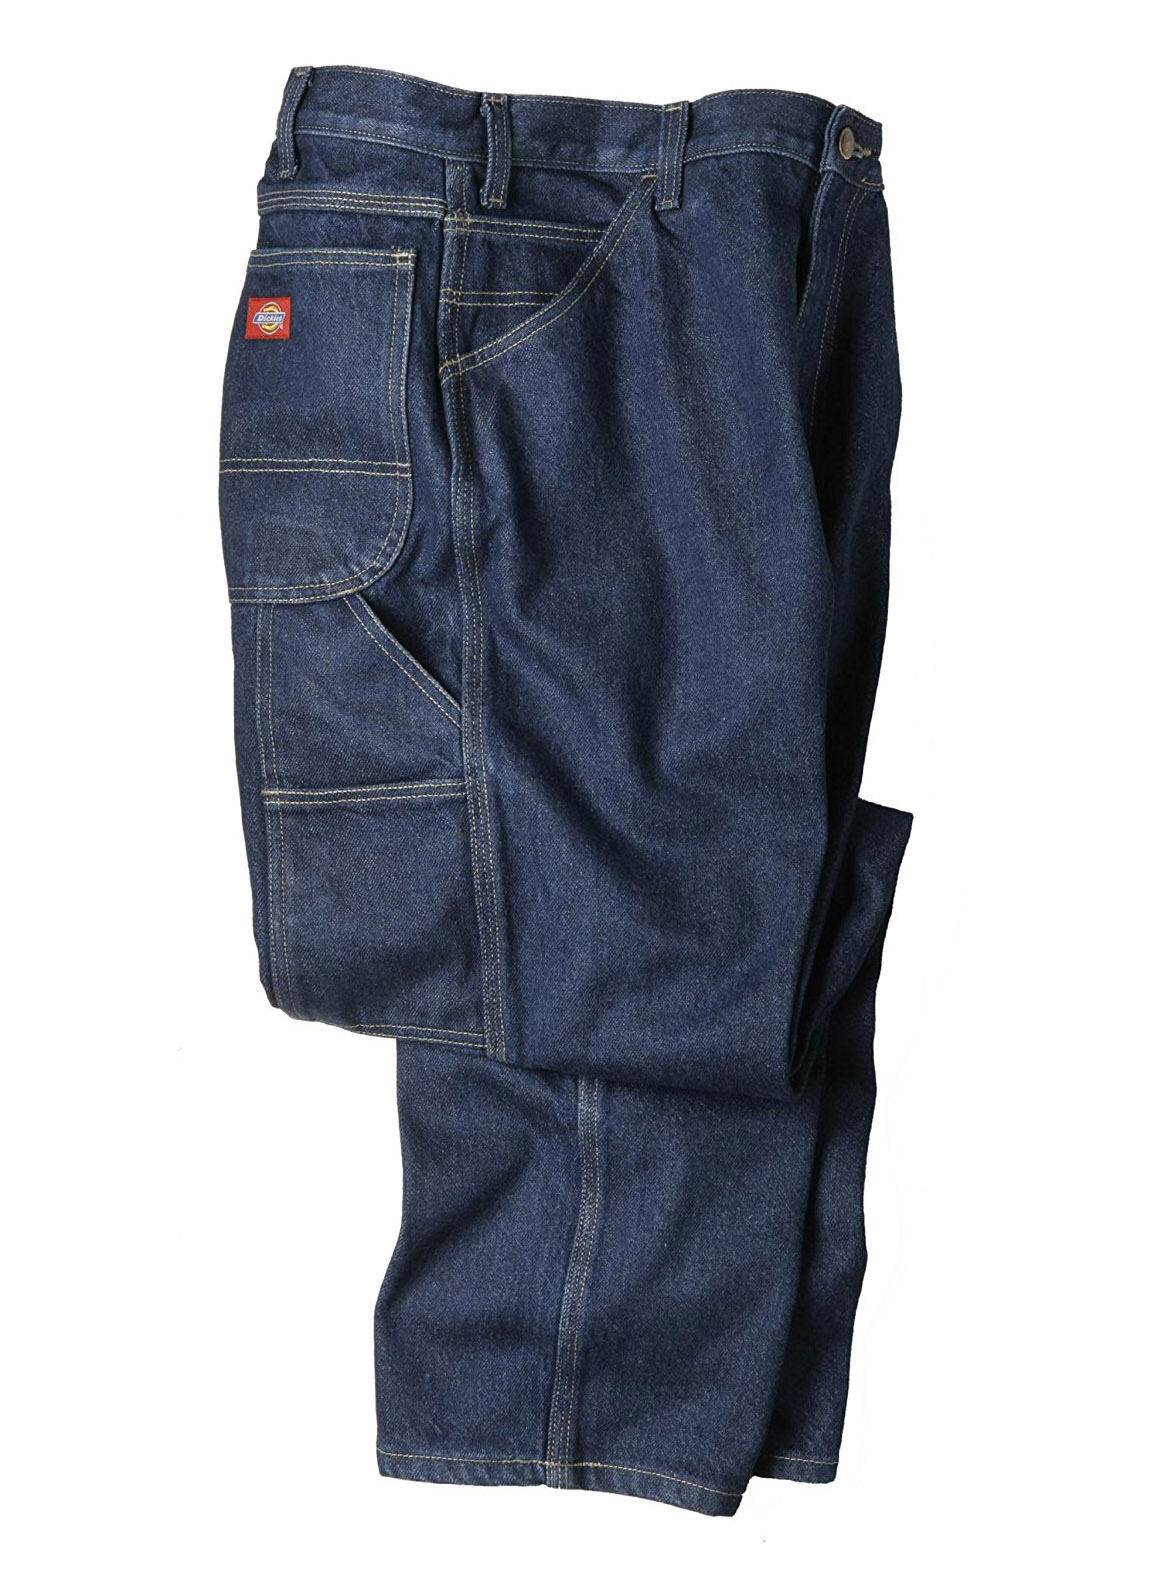 best jeans for working outside